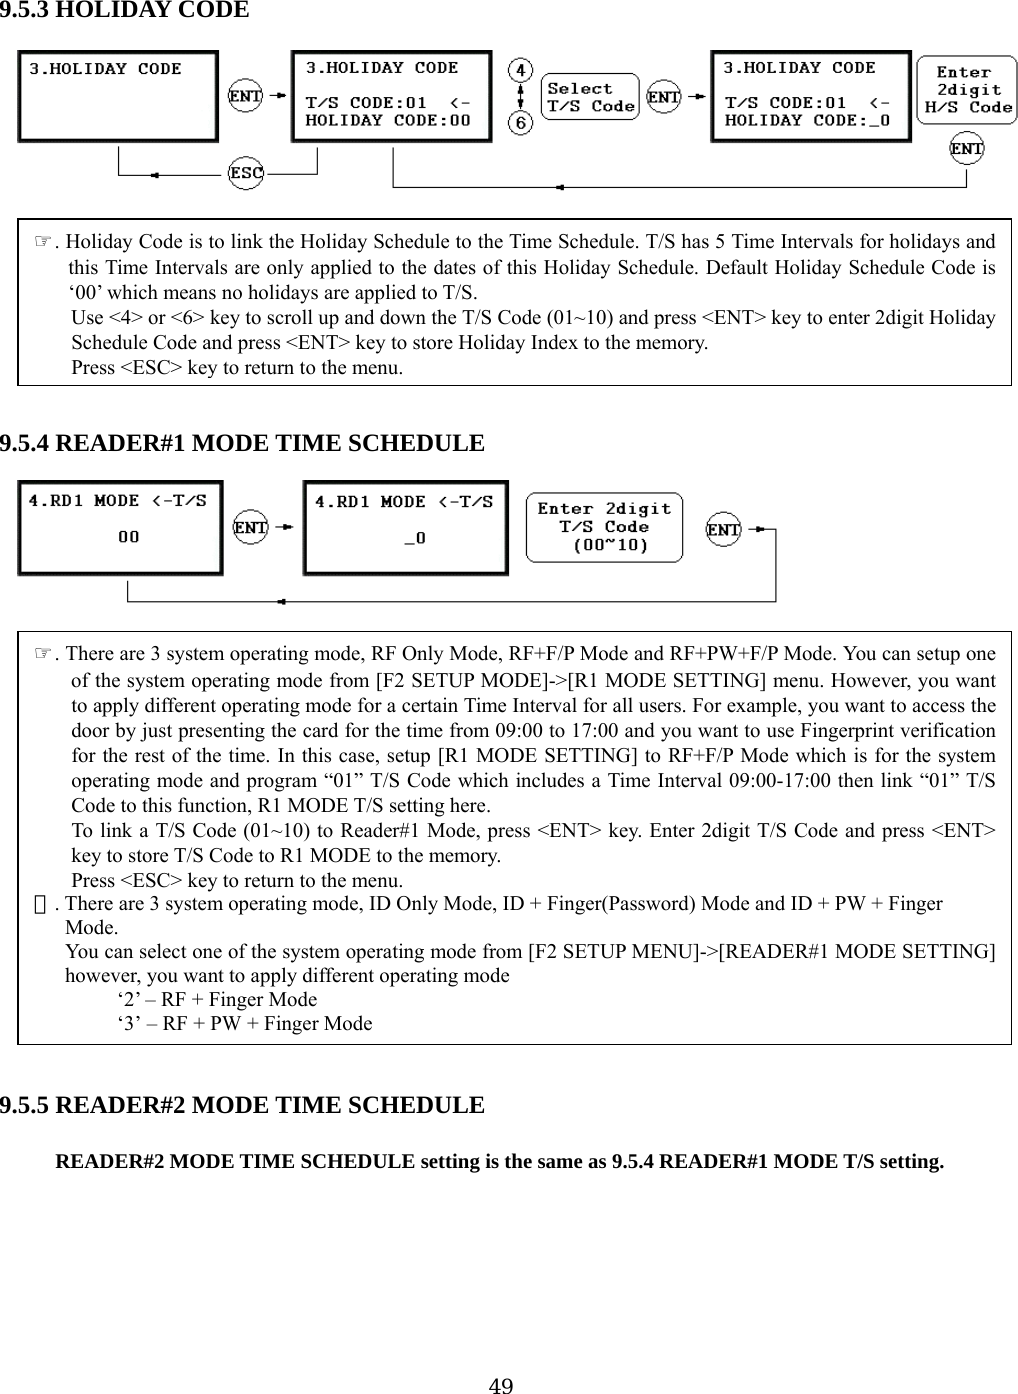  9.           .5.5 R ULE  READER#2 MODE TIME SCHEDULE setting is the same as 9.5.4 READER#1 MODE T/S setting. 5.3 HOLIDAY CODE oliday Code is to link the Holiday Schedule to the Time Schedule. T/S has 5 Time Intervals for holidays andth ay Schedule. Default Holiday Schedule Code is‘ o T/S. Use &lt;4&gt; or &lt;6&gt; key to scroll up and down the T/S Code (01~10) and press &lt;ENT&gt; key to enter 2digit Holidais Time Intervals are only applied to the dates of this Holid00’ which means no holidays are applied t       9.5.4 READER#1 MODE TIME SCHEDULE  EADER#2 MODE TIME SCHEDPress &lt;ESC&gt; key to return to the menu. . There are 3 system operating mode, ☞ID Only Mode, ID + Finger(Password) Mode and ID + PW + Finger ode. ou can select one of the system operating mode frhowever, you want to apply different operating mode   ‘2’ – RF + Finger Mode ‘3’ – RF + PW + Finger Mode ☞. HySchedule Code and press &lt;ENT&gt; key to store Holiday Index to the memory. Press &lt;ESC&gt; key to return to the menu.☞. There are 3 system operating mode, RF Only Mode, RF+F/P Mode and RF+PW+F/P Mode. You can setup oneof the system operating mode from [F2 SETUP MODE]-&gt;[R1 MODE SETTING] menu. However, you wantto apply different operating mode for a certain Time Interval for all users. For example, you want to access thedoor by just presenting the card for the time from 09:00 to 17:00 and you want to use Fingerprint verificationfor the rest of the time. In this case, setup [R1 MODE SETTING] to RF+F/P Mode which is for the systemoperating mode and program “01” T/S Code which includes a Time Interval 09:00-17:00 then link “01” T/SCode to this function, R1 MODE T/S setting here. To link a T/S Code (01~10) to Reader#1 Mode, press &lt;ENT&gt; key. Enter 2digit T/S Code and press &lt;ENT&gt;key to store T/S Code to R1 MODE to the memory. M      Y om [F2 SETUP MENU]-&gt;[READER#1 MODE SETTING]      9      49